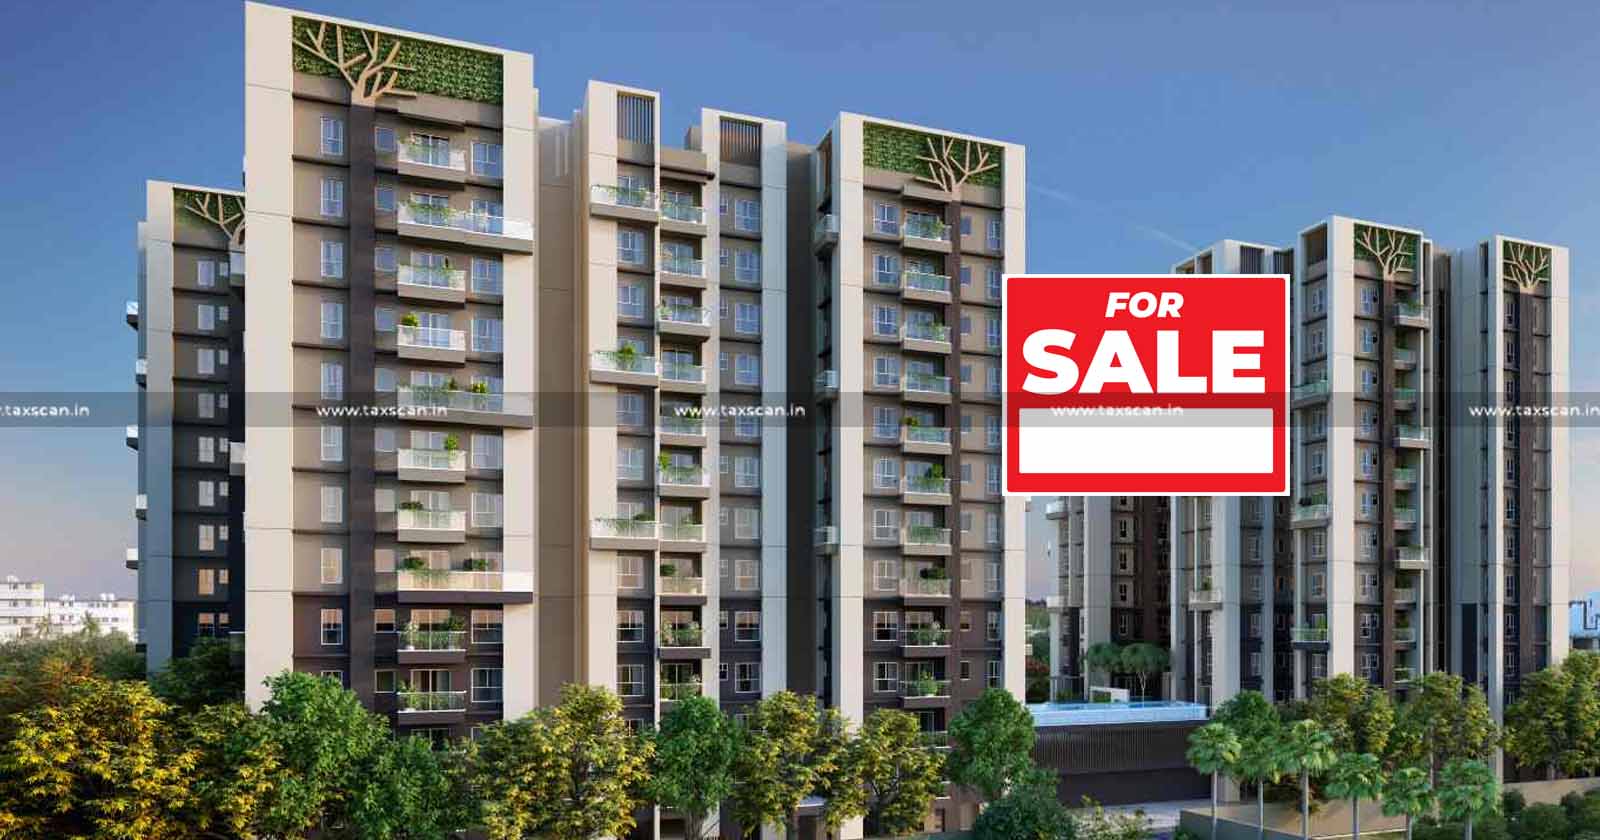 Sale of residential apartments - residential apartments to buyers - residential apartments - composite supply - GST - AAR - taxscan